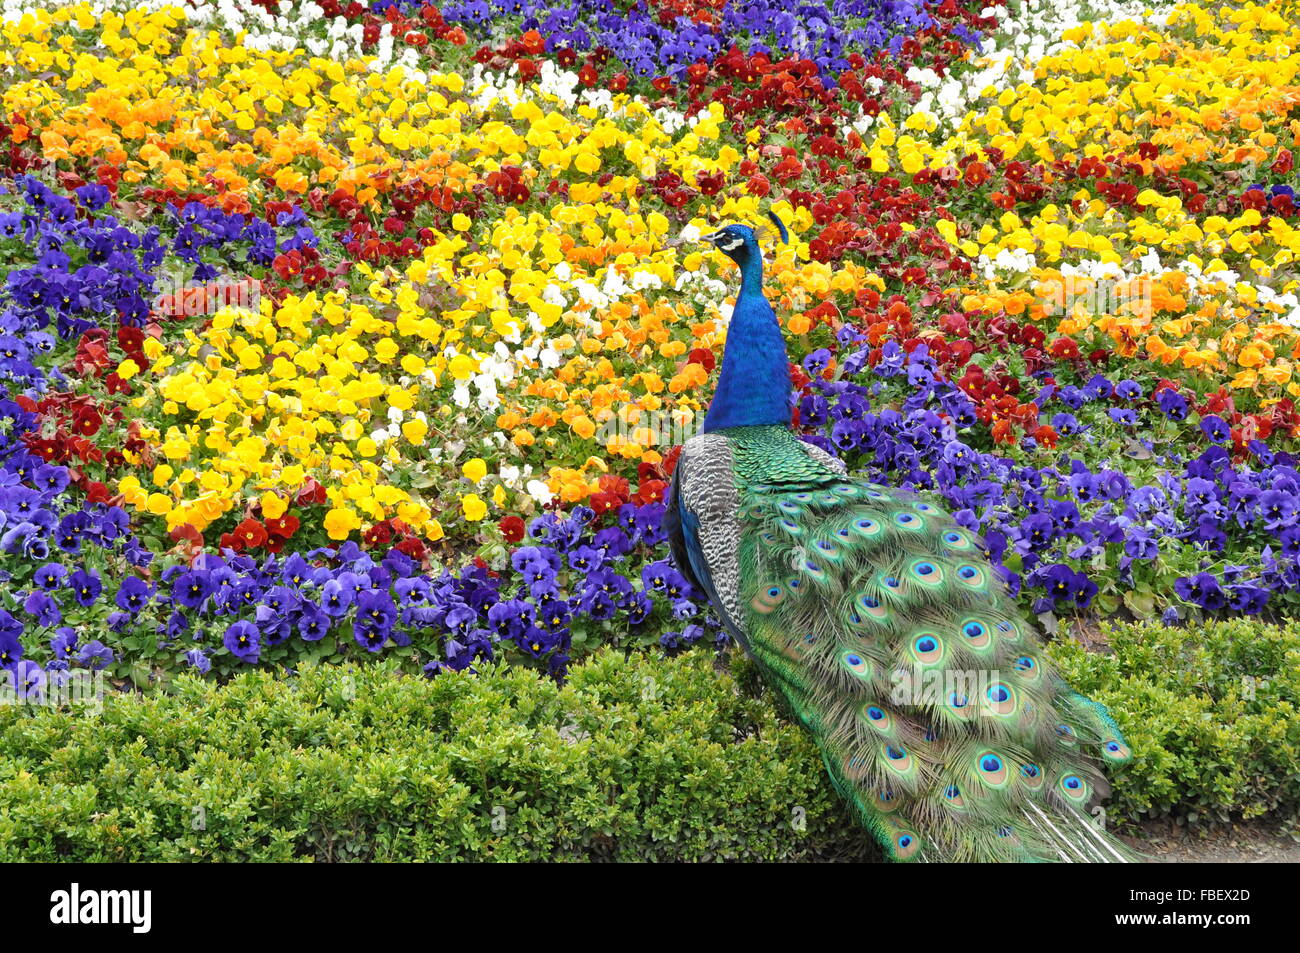 Peacock Sitting in Flowers Stock Photo